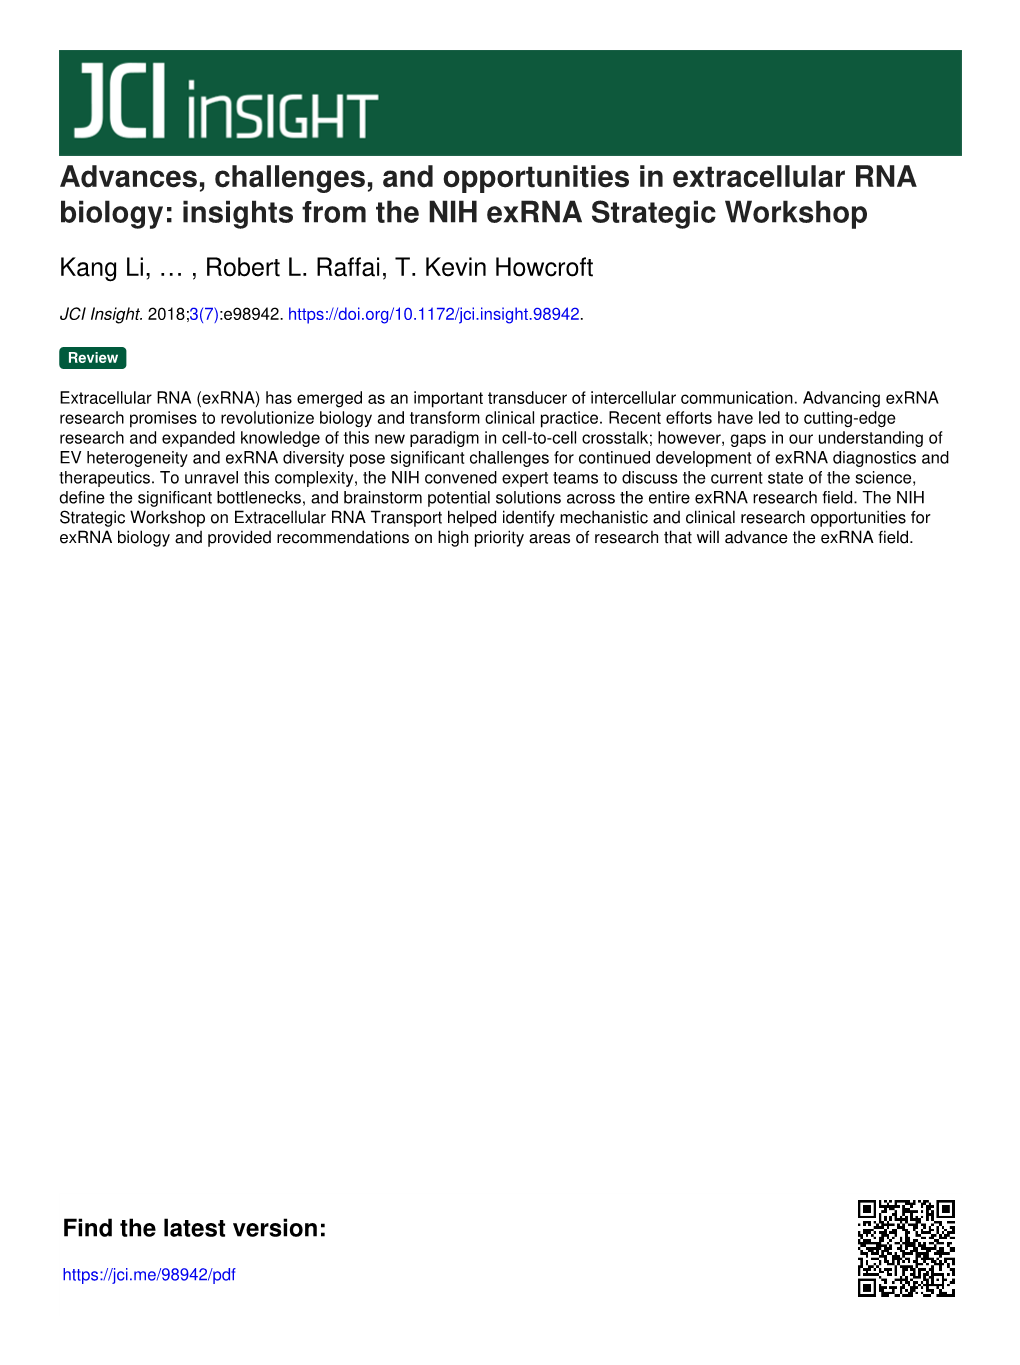 Advances, Challenges, and Opportunities in Extracellular RNA Biology: Insights from the NIH Exrna Strategic Workshop